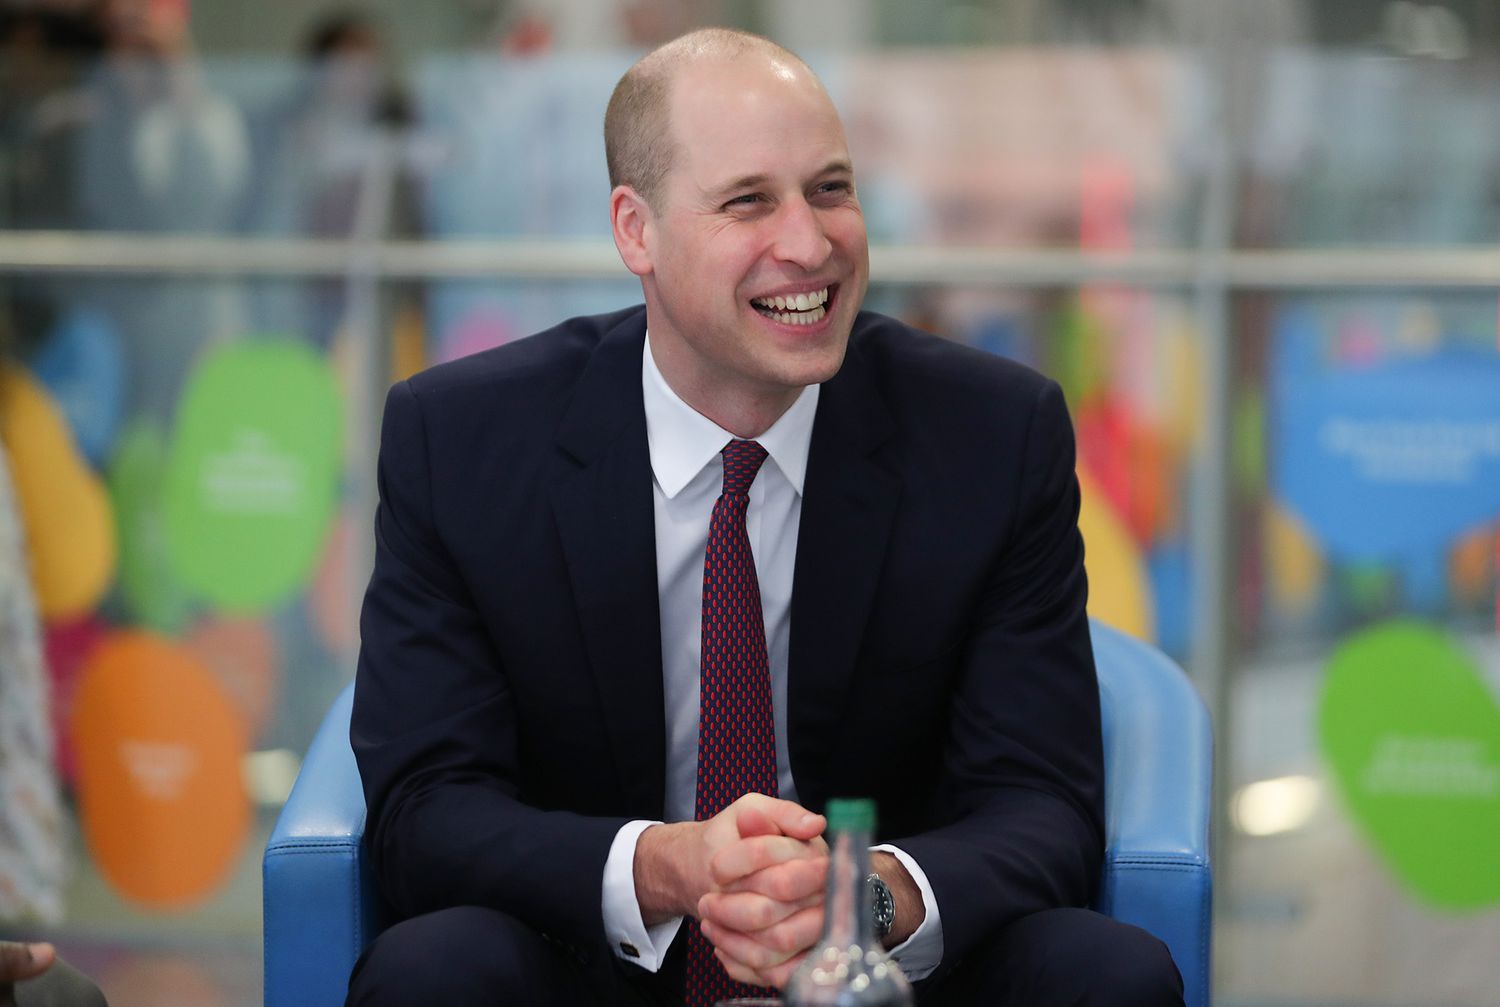 Prince William Launchs Nationwide Veterans Programme